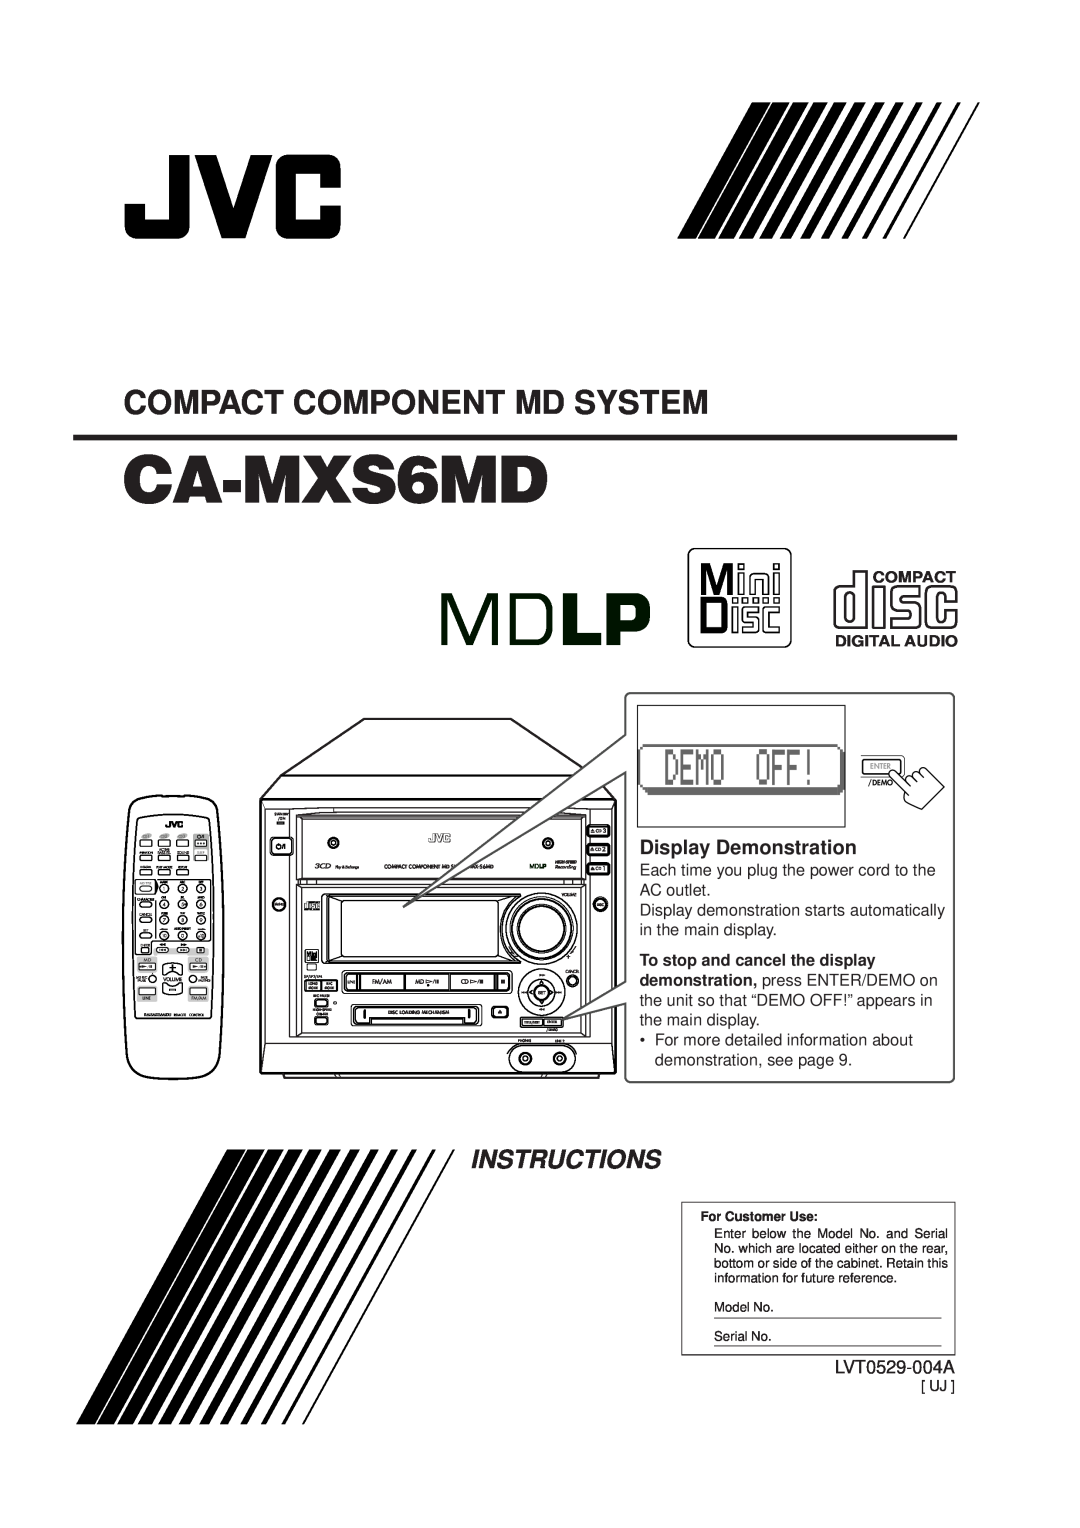 JVC CA-MXS6MD manual Display Demonstration, Compact Component Md System, Instructions, LVT0529-004A 